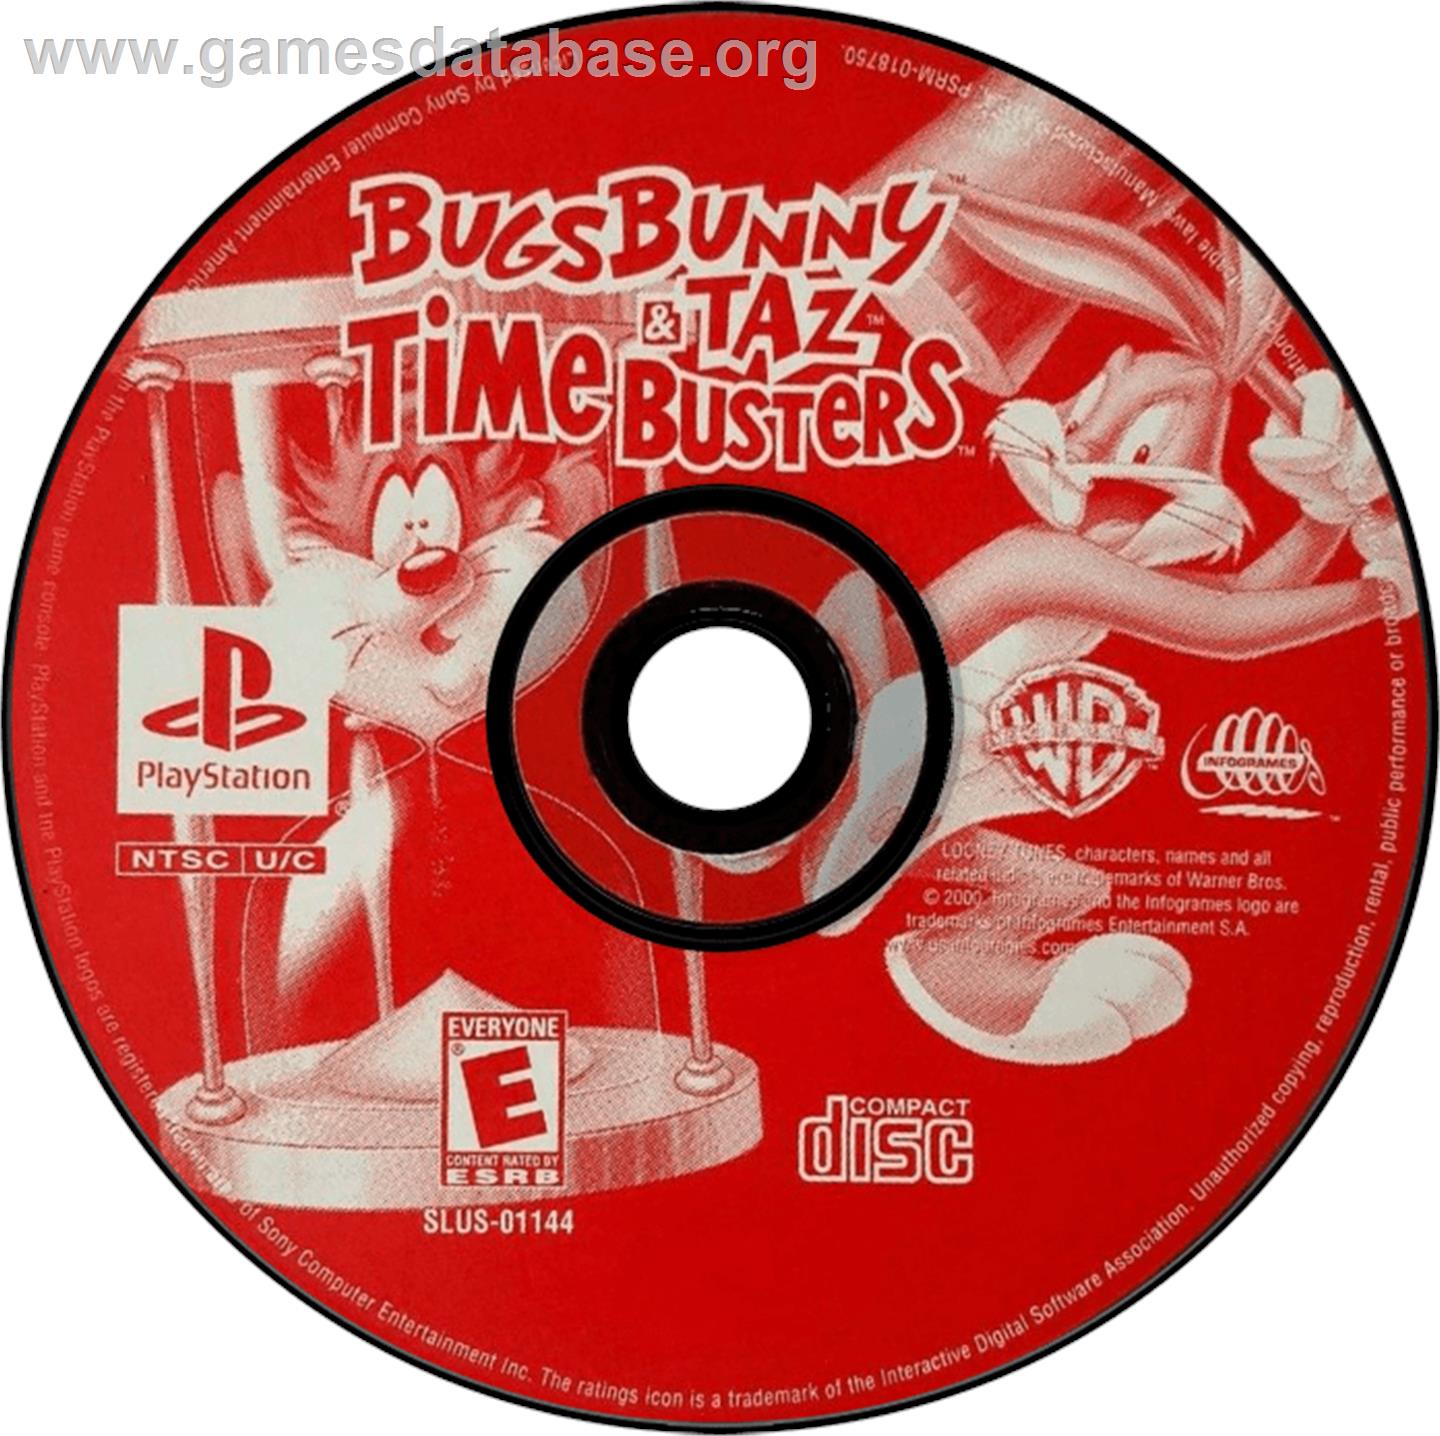 Bugs Bunny & Taz: Time Busters - Sony Playstation - Artwork - Disc